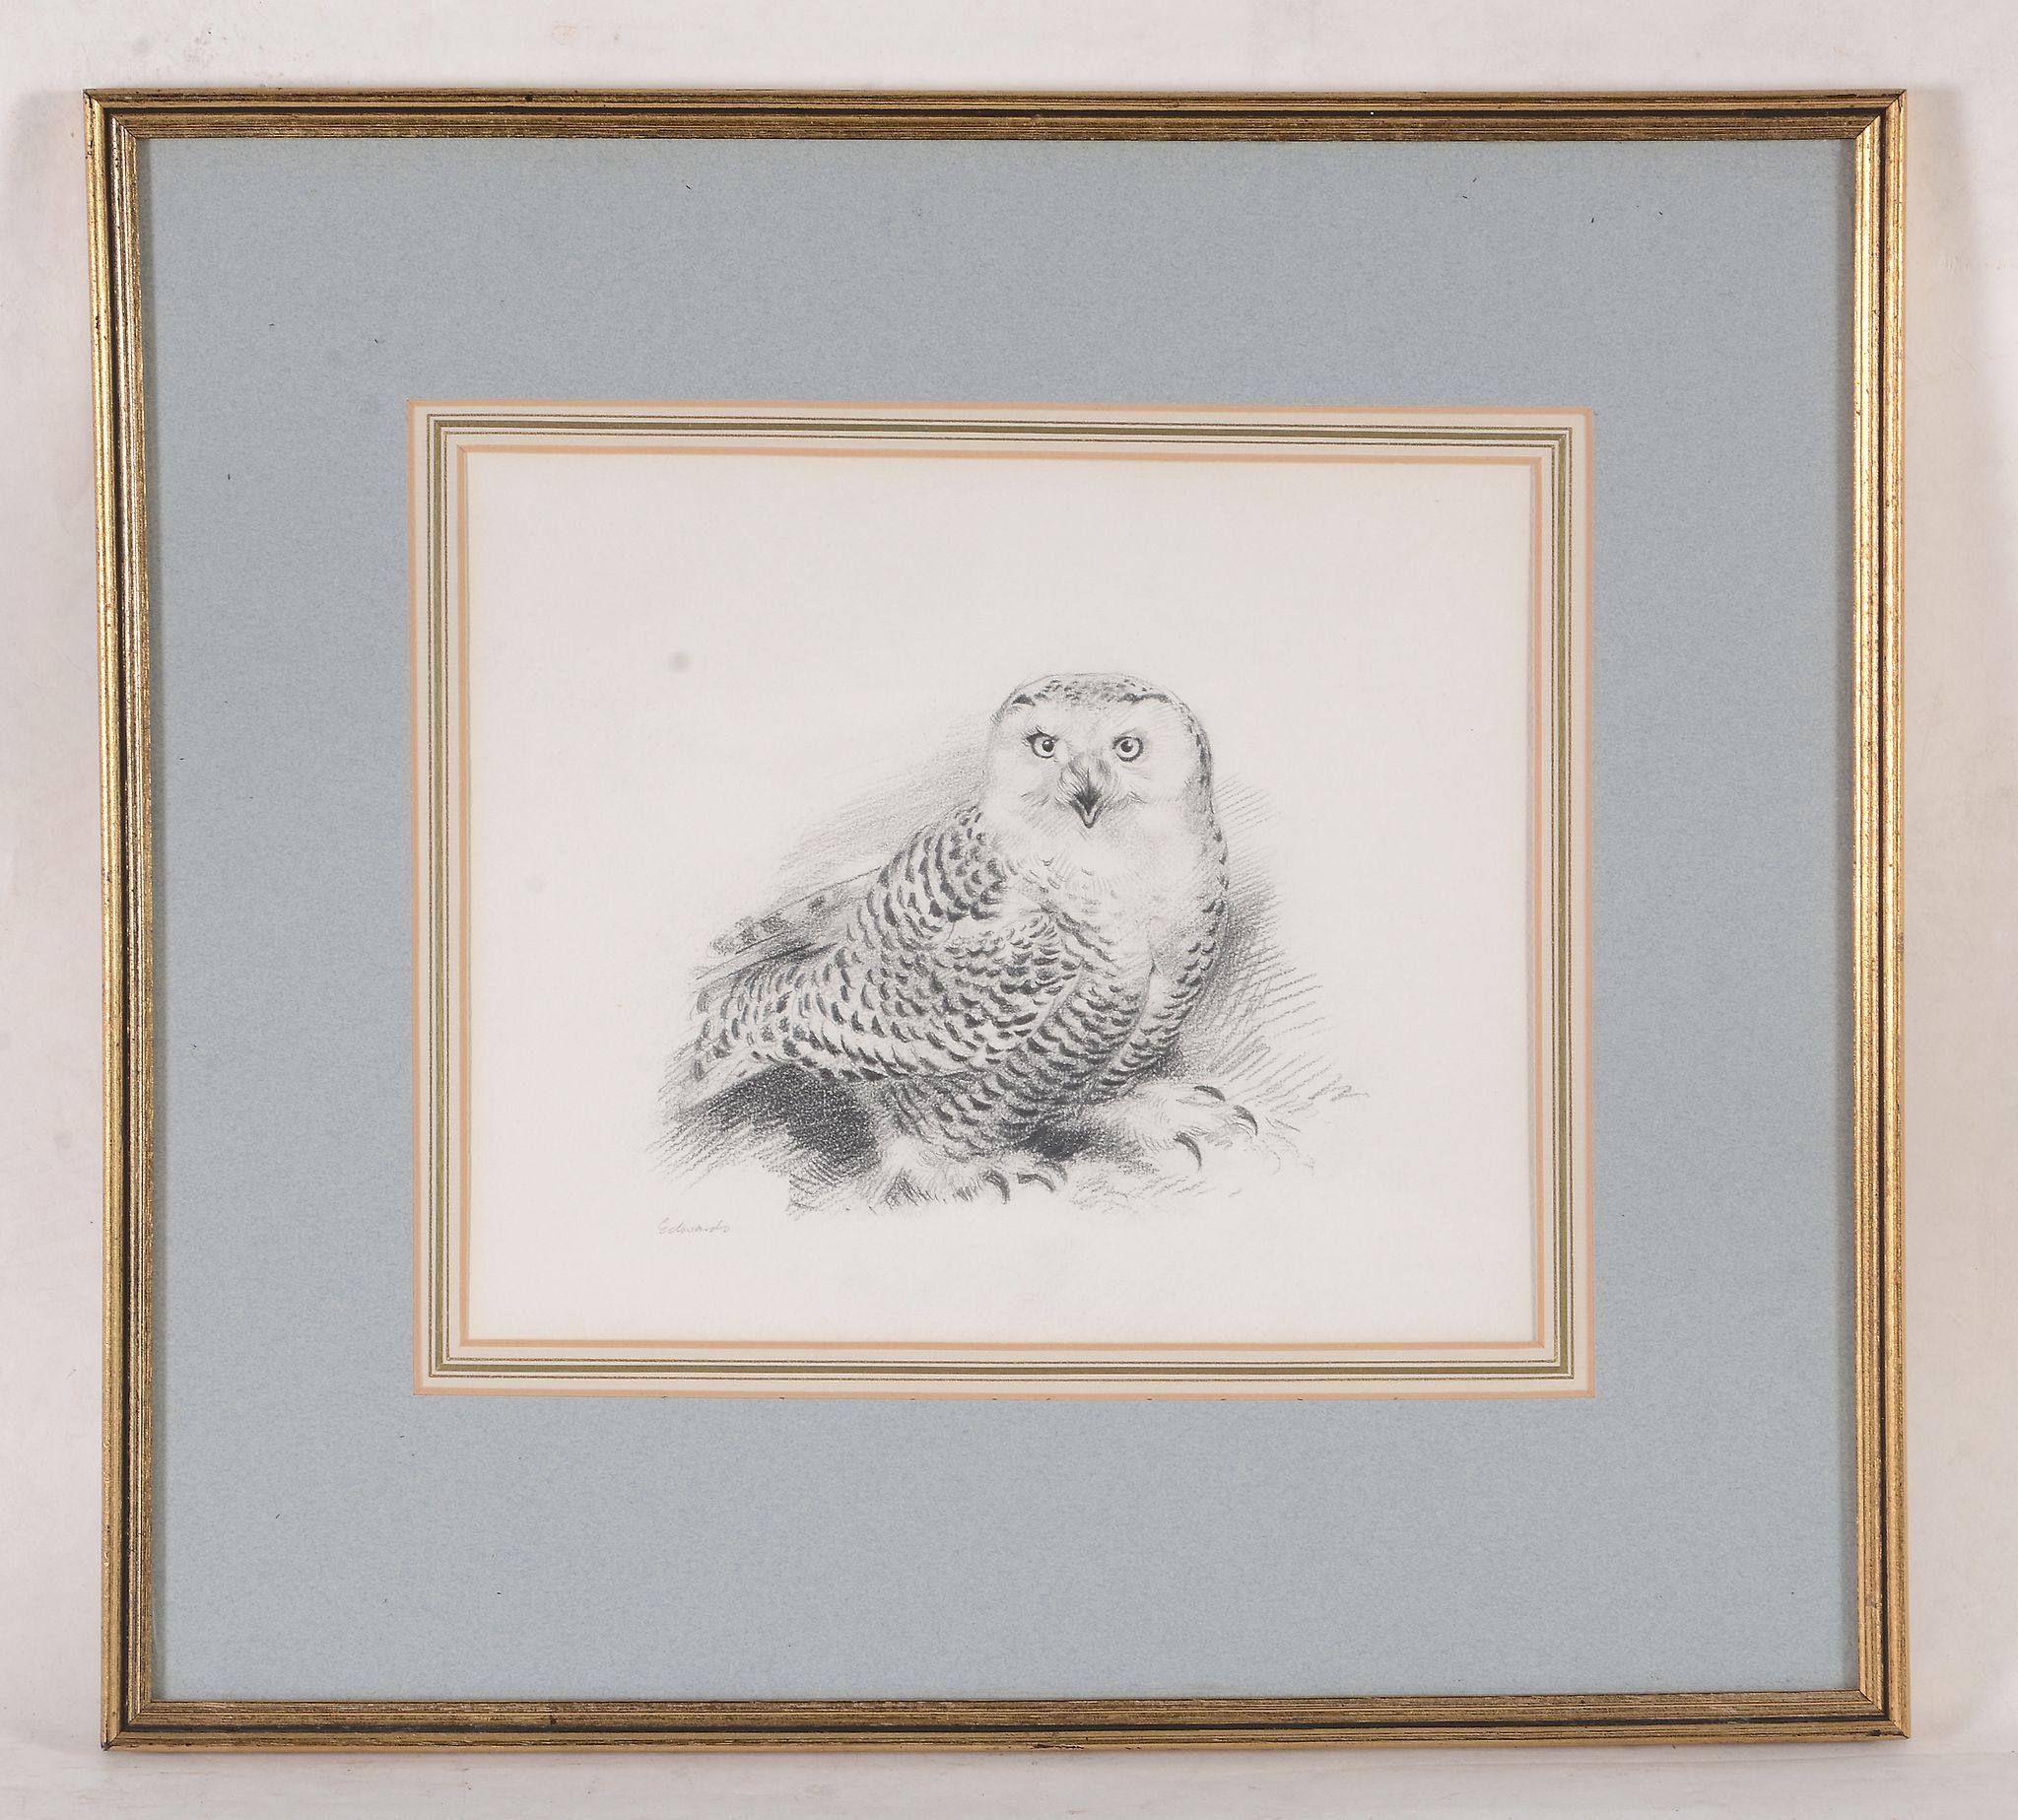 John C. Edwards (20th Century) - Study of an eagle Graphite, hightened with white, on light grey - Image 6 of 9